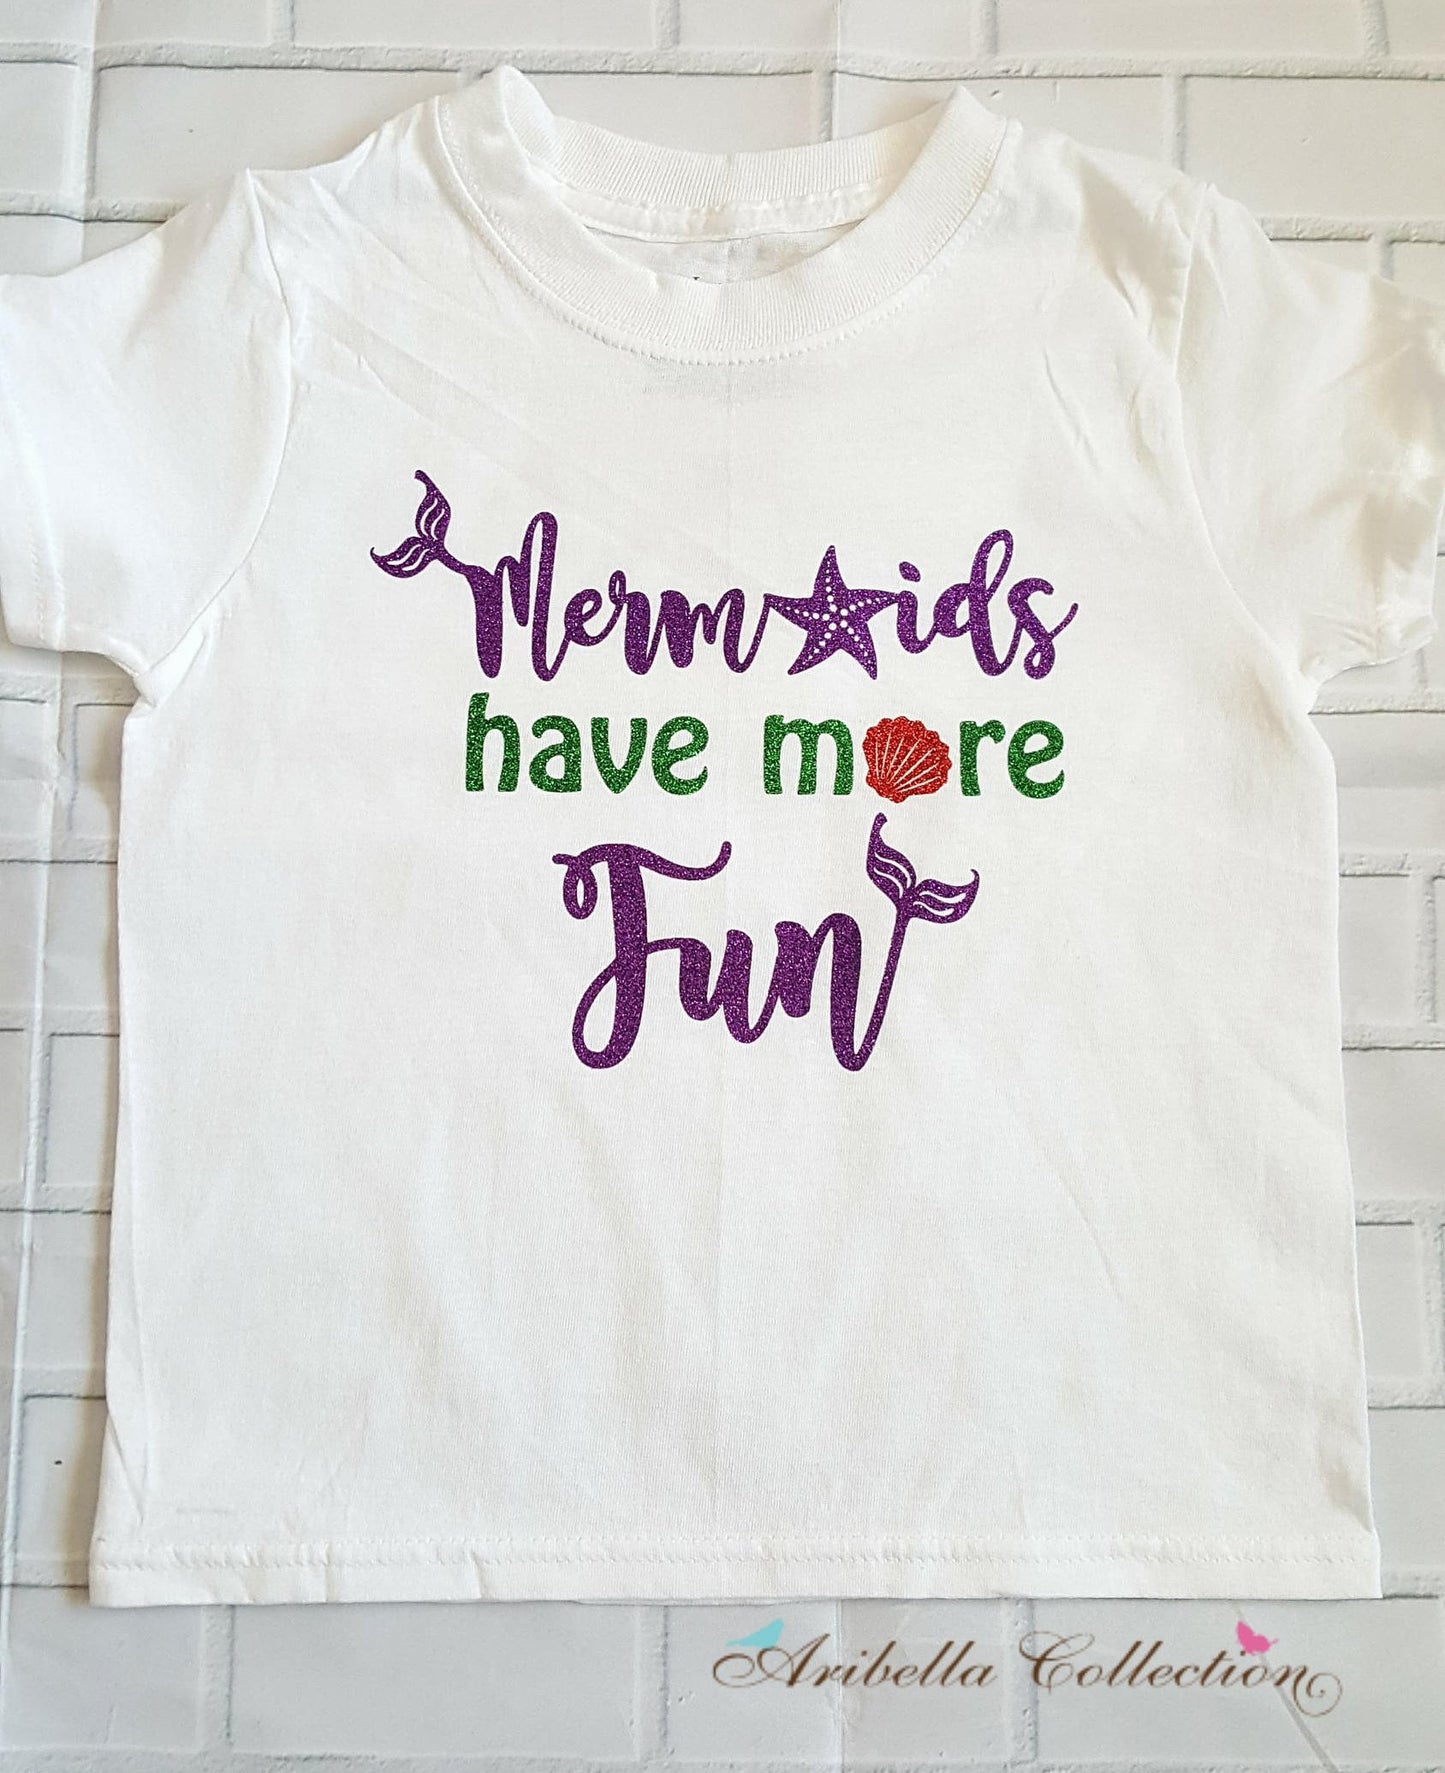 Mermaids Have More Fun Outfit - Bodysuit or T-shirt, Legging, & Bow - Aribella Collection, Inc.